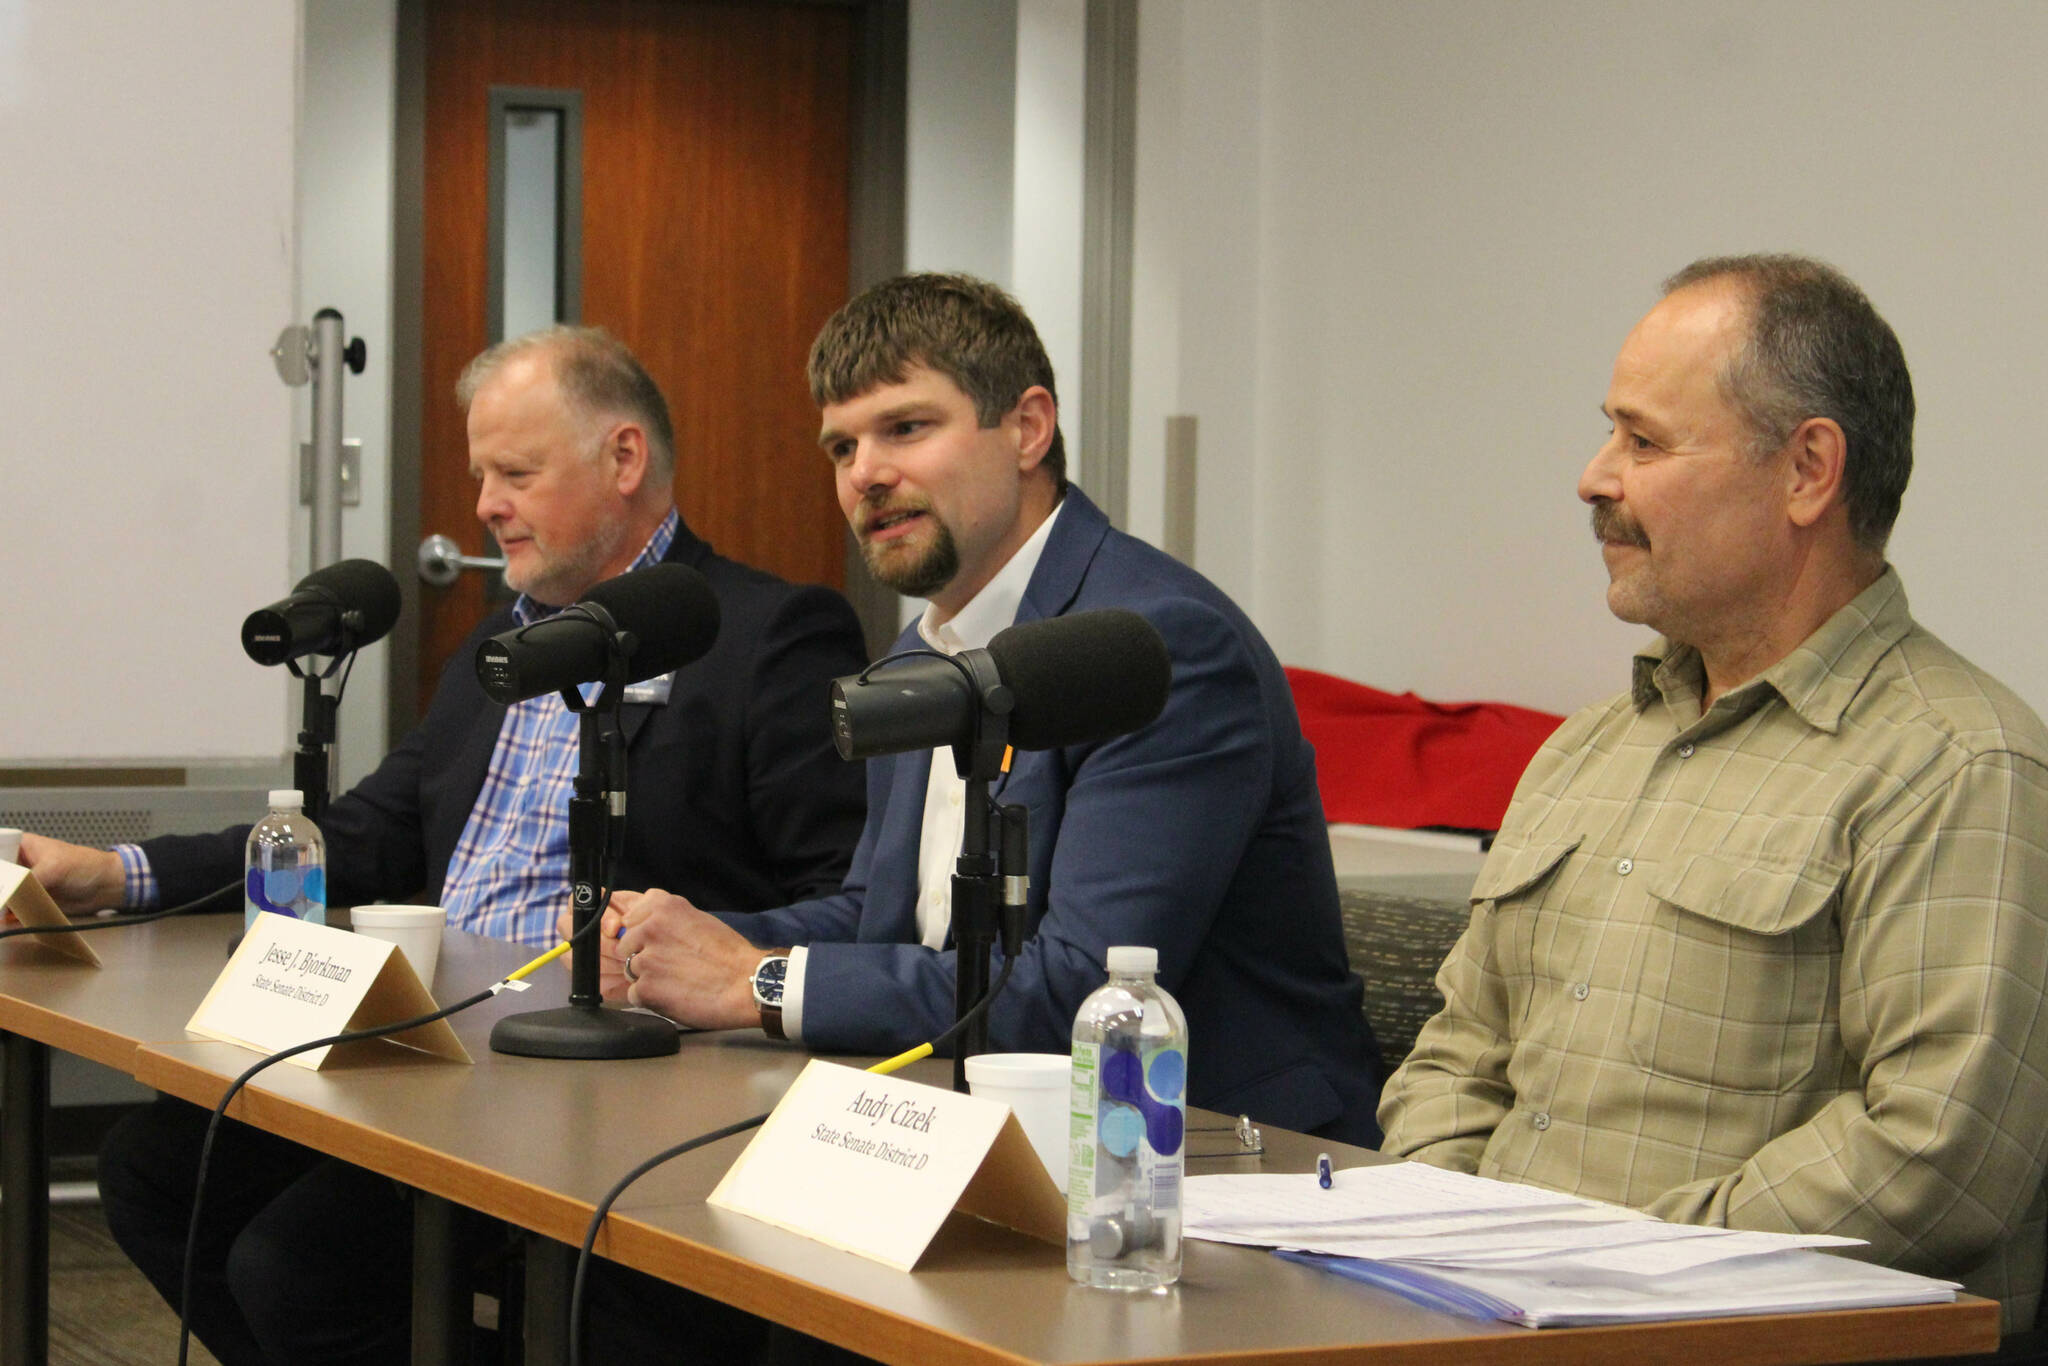 From left: Alaska Senate District D candidates Tuckerman Babcock, Jesse Bjorkman and Andy Cizek participate in a candidate forum at the Soldotna Public Library on Monday, Oct. 17, 2022 in Soldotna, Alaska. (Ashlyn O’Hara/Peninsula Clarion)